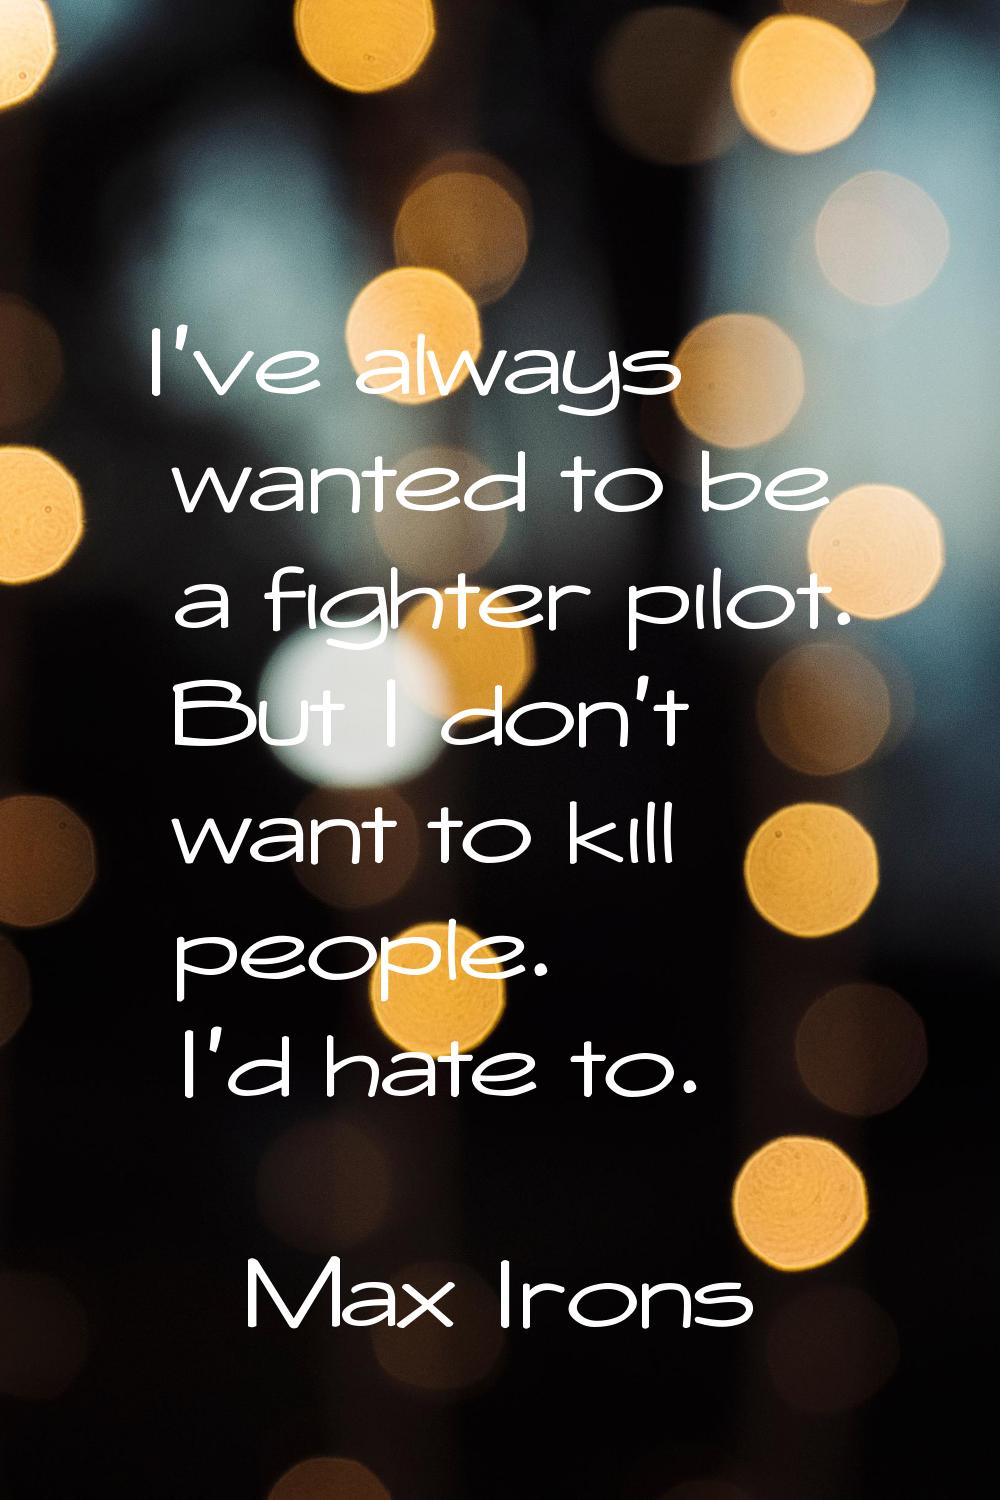 I've always wanted to be a fighter pilot. But I don't want to kill people. I'd hate to.